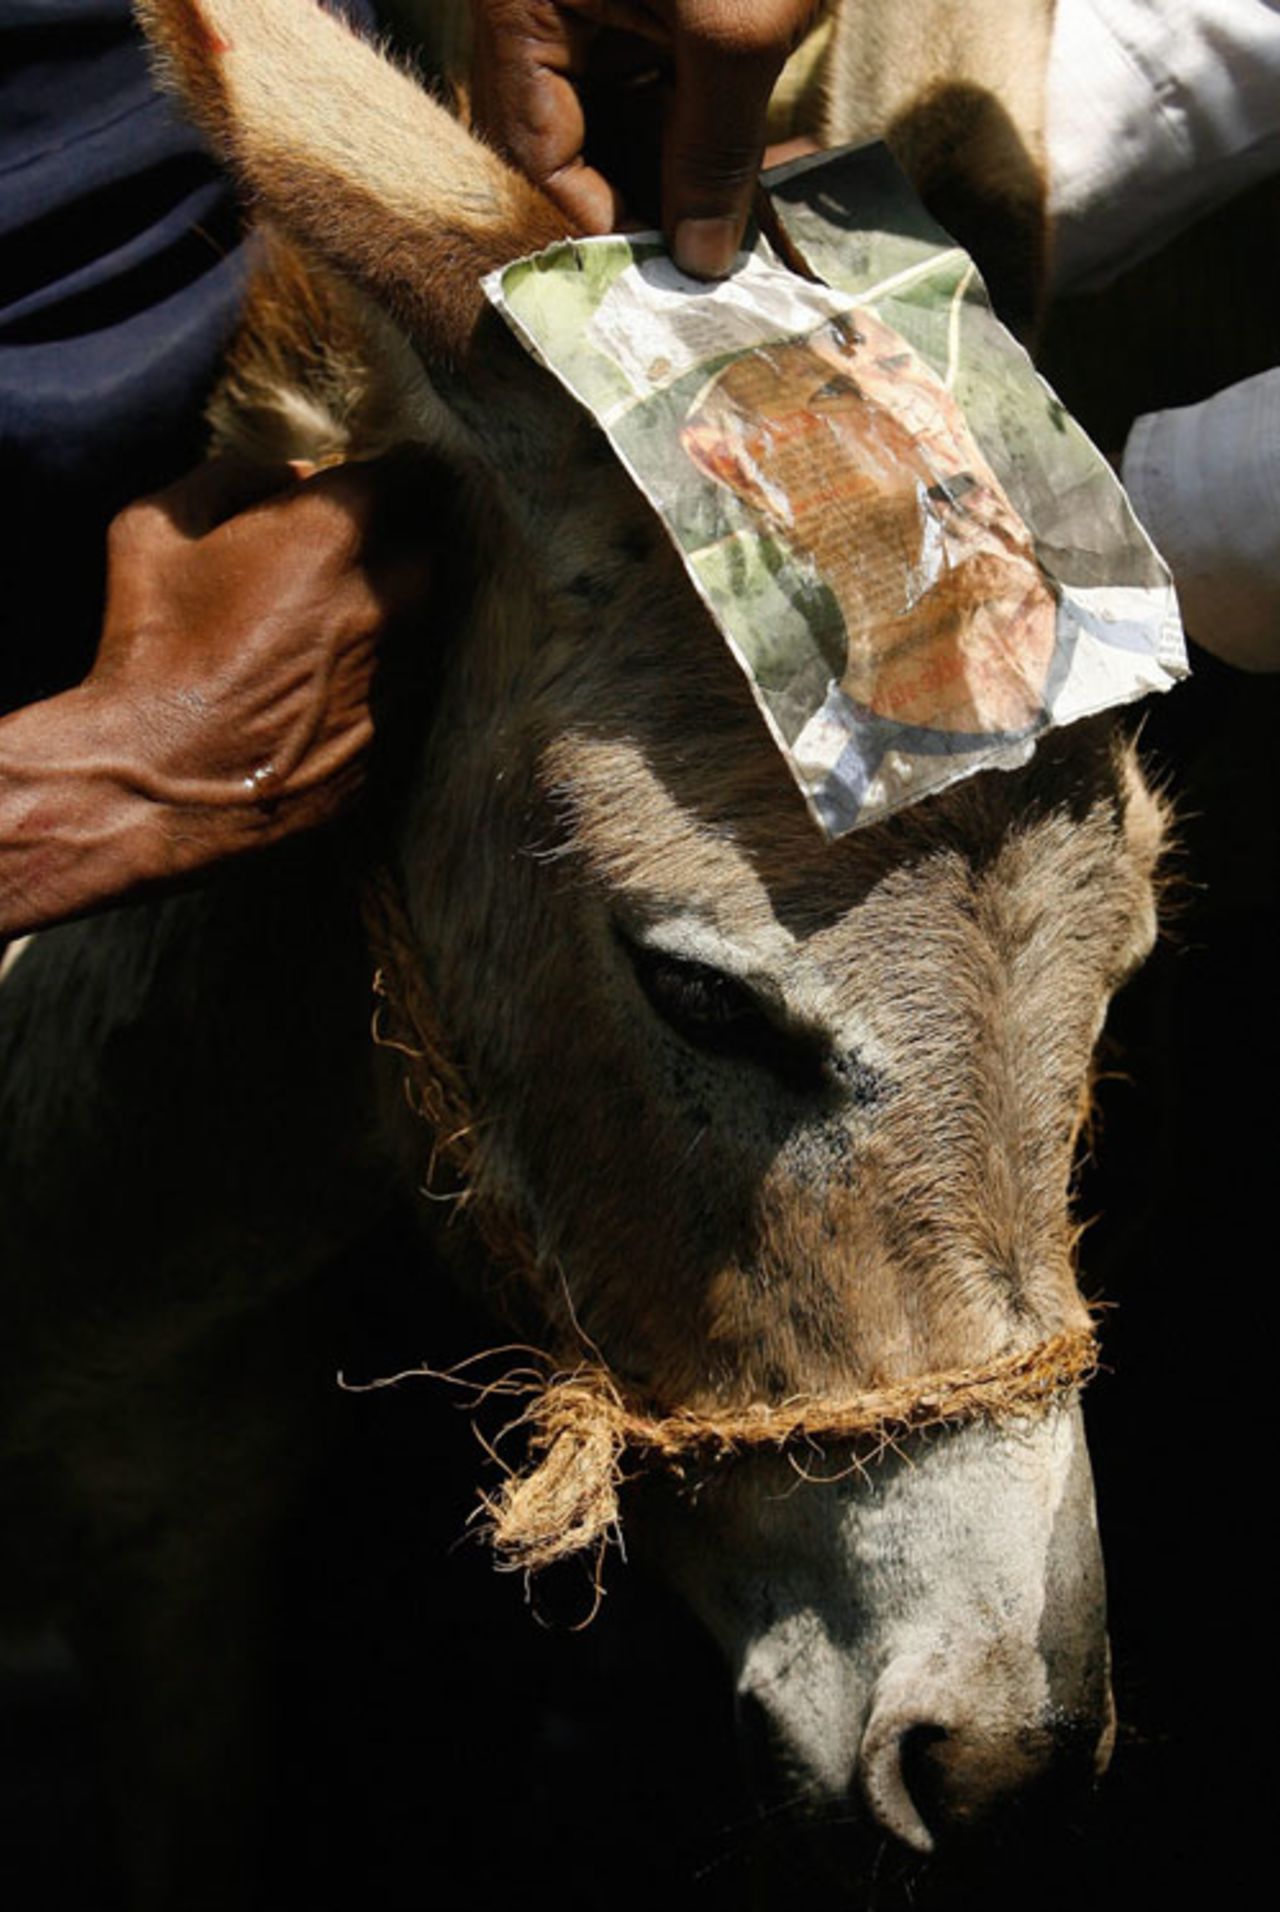 A protestor holds a picture of Greg Chappell on a donkey's head in Mumbai, April 5, 2007